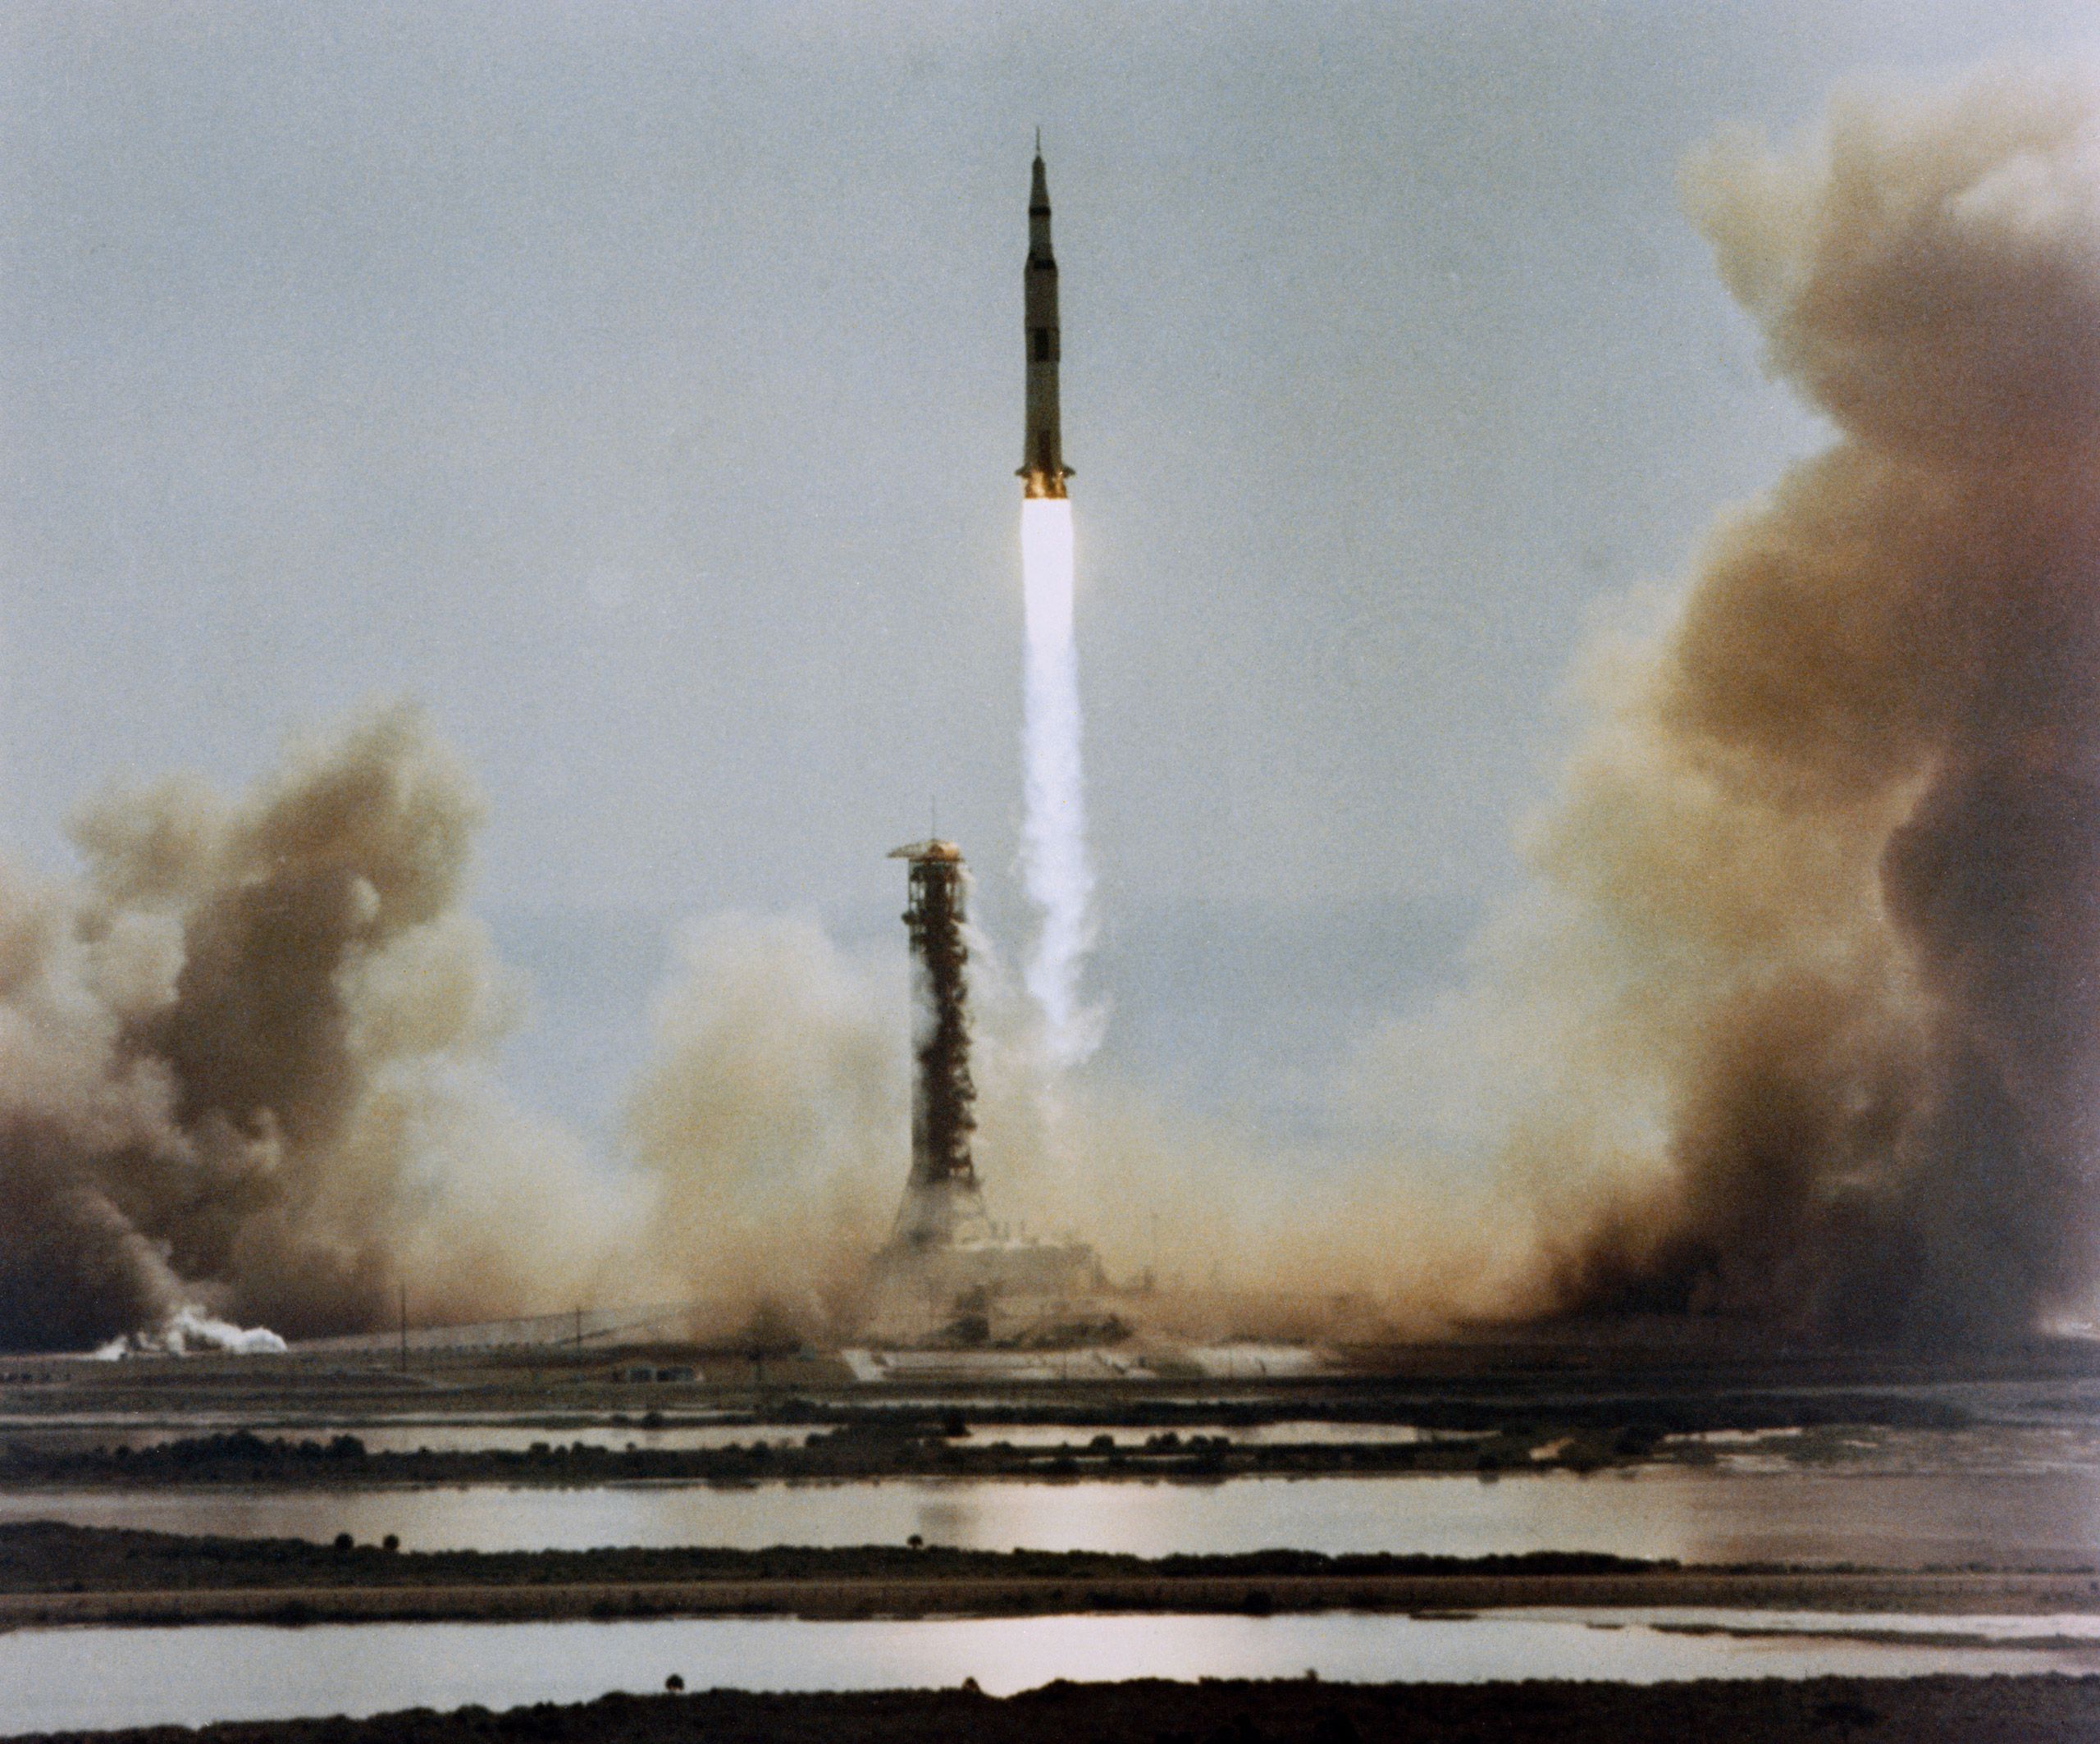 Moonbound Apollo 11 clears the launch tower.